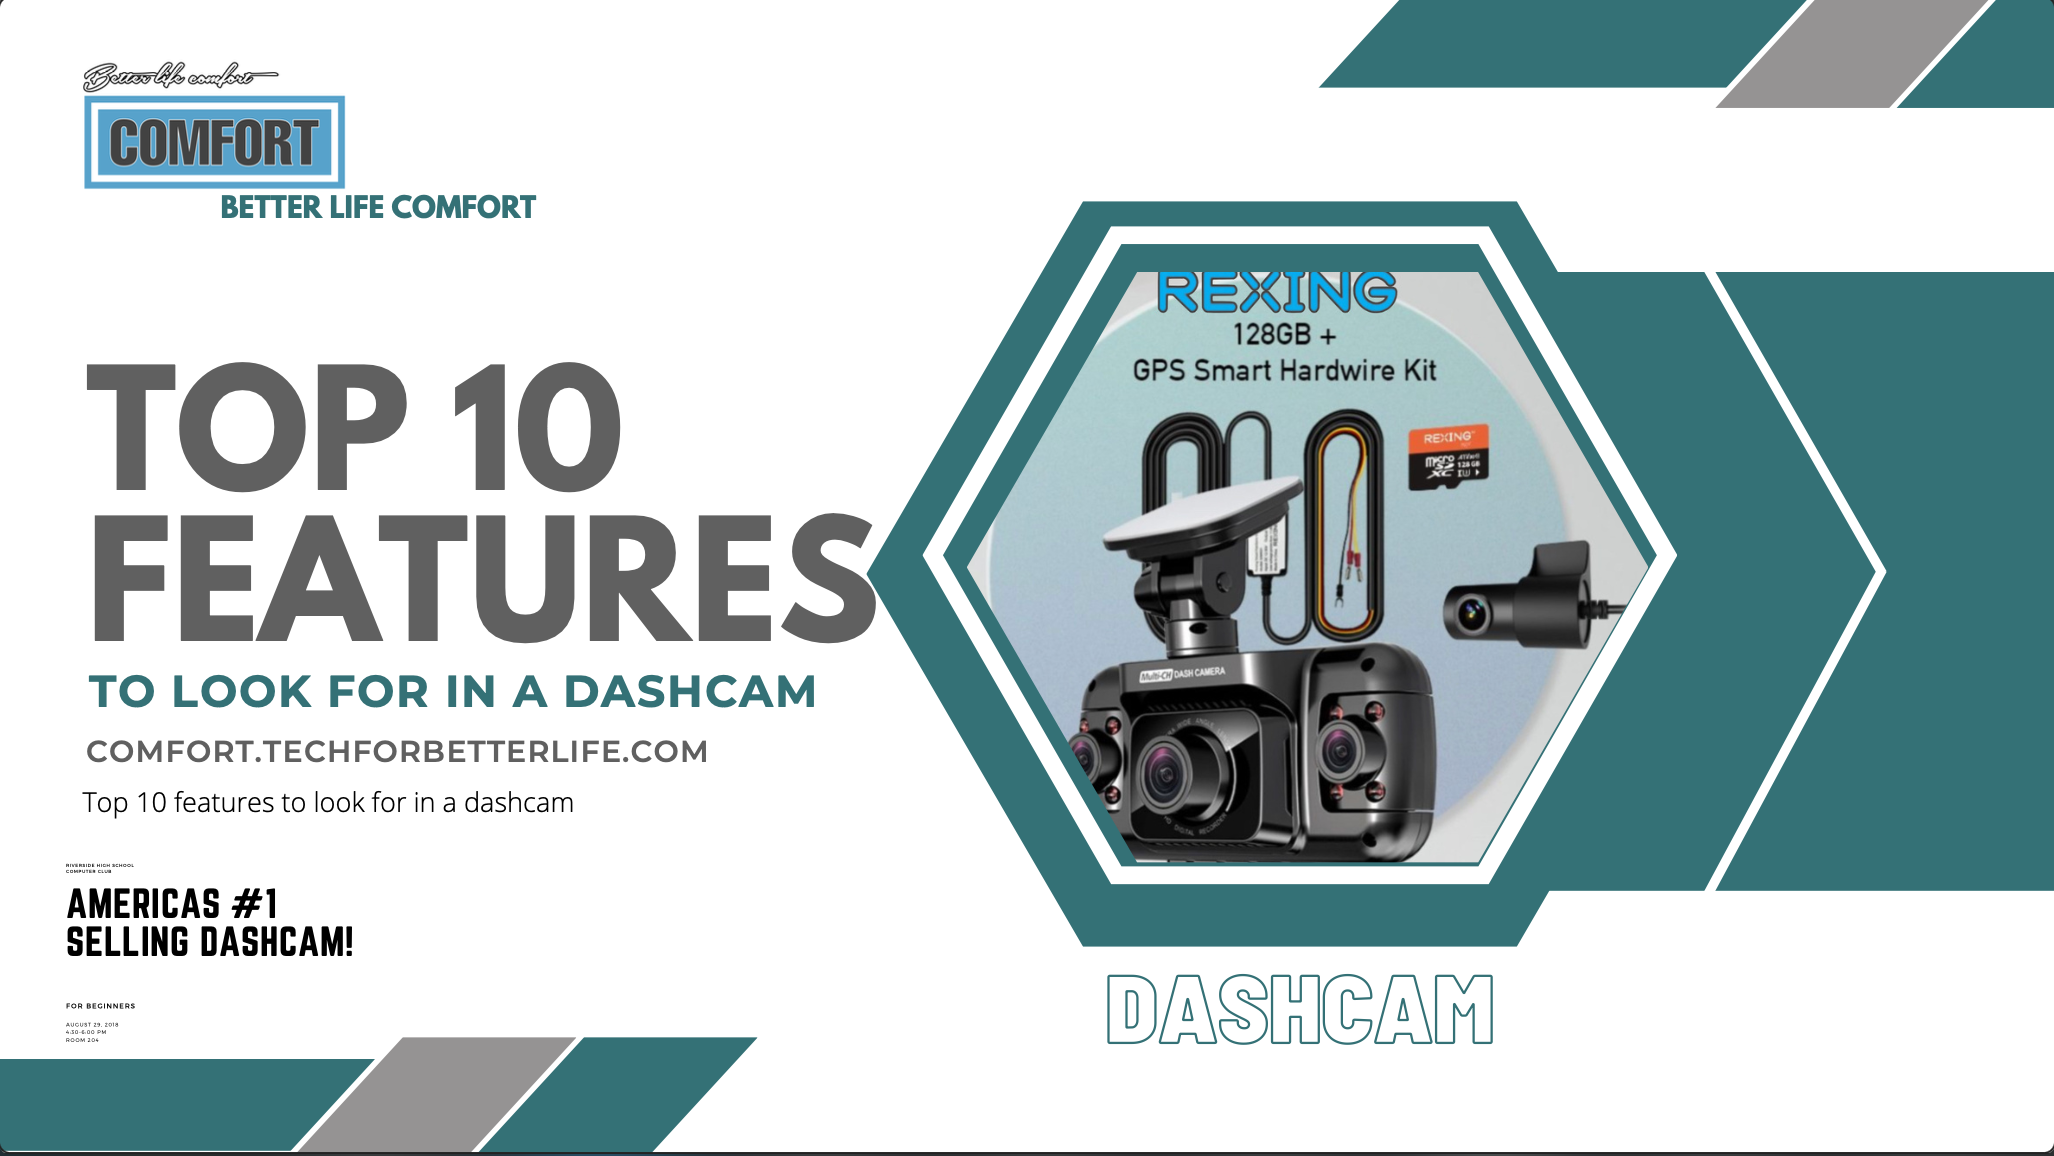 Top 10 features to look for in a dashcam